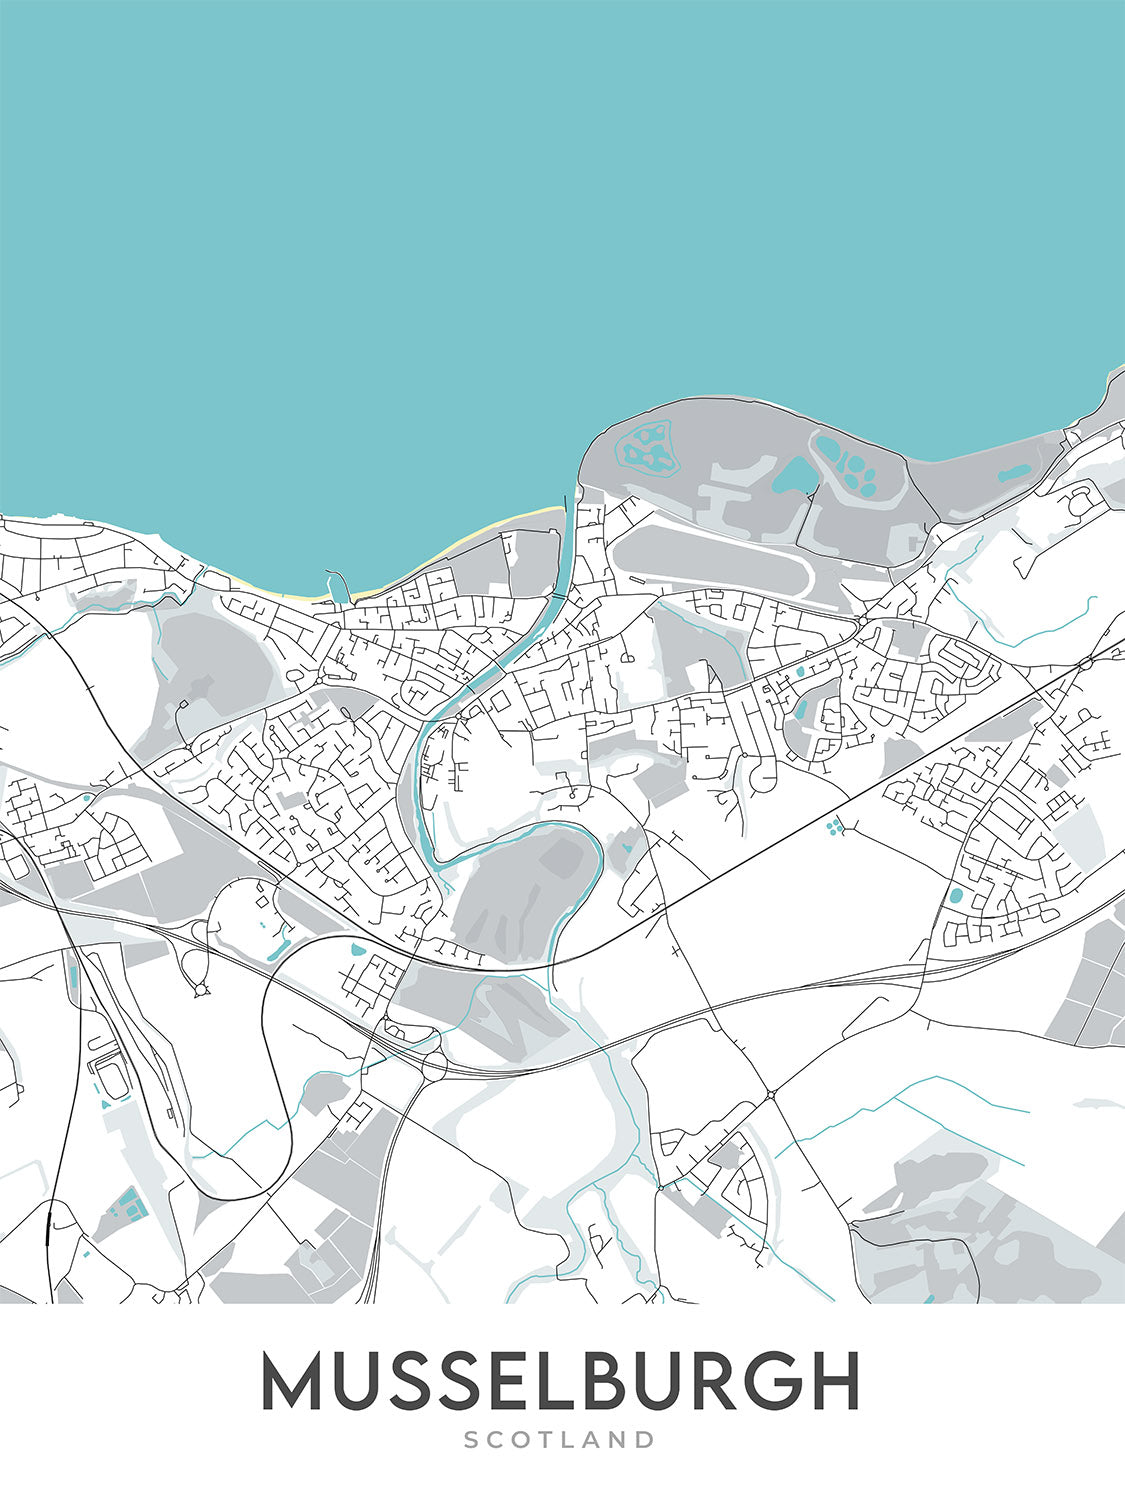 Modern Town Map of Musselburgh, Scotland: Fisherrow Harbour, River Esk, Racecourse, Pinkie, A199